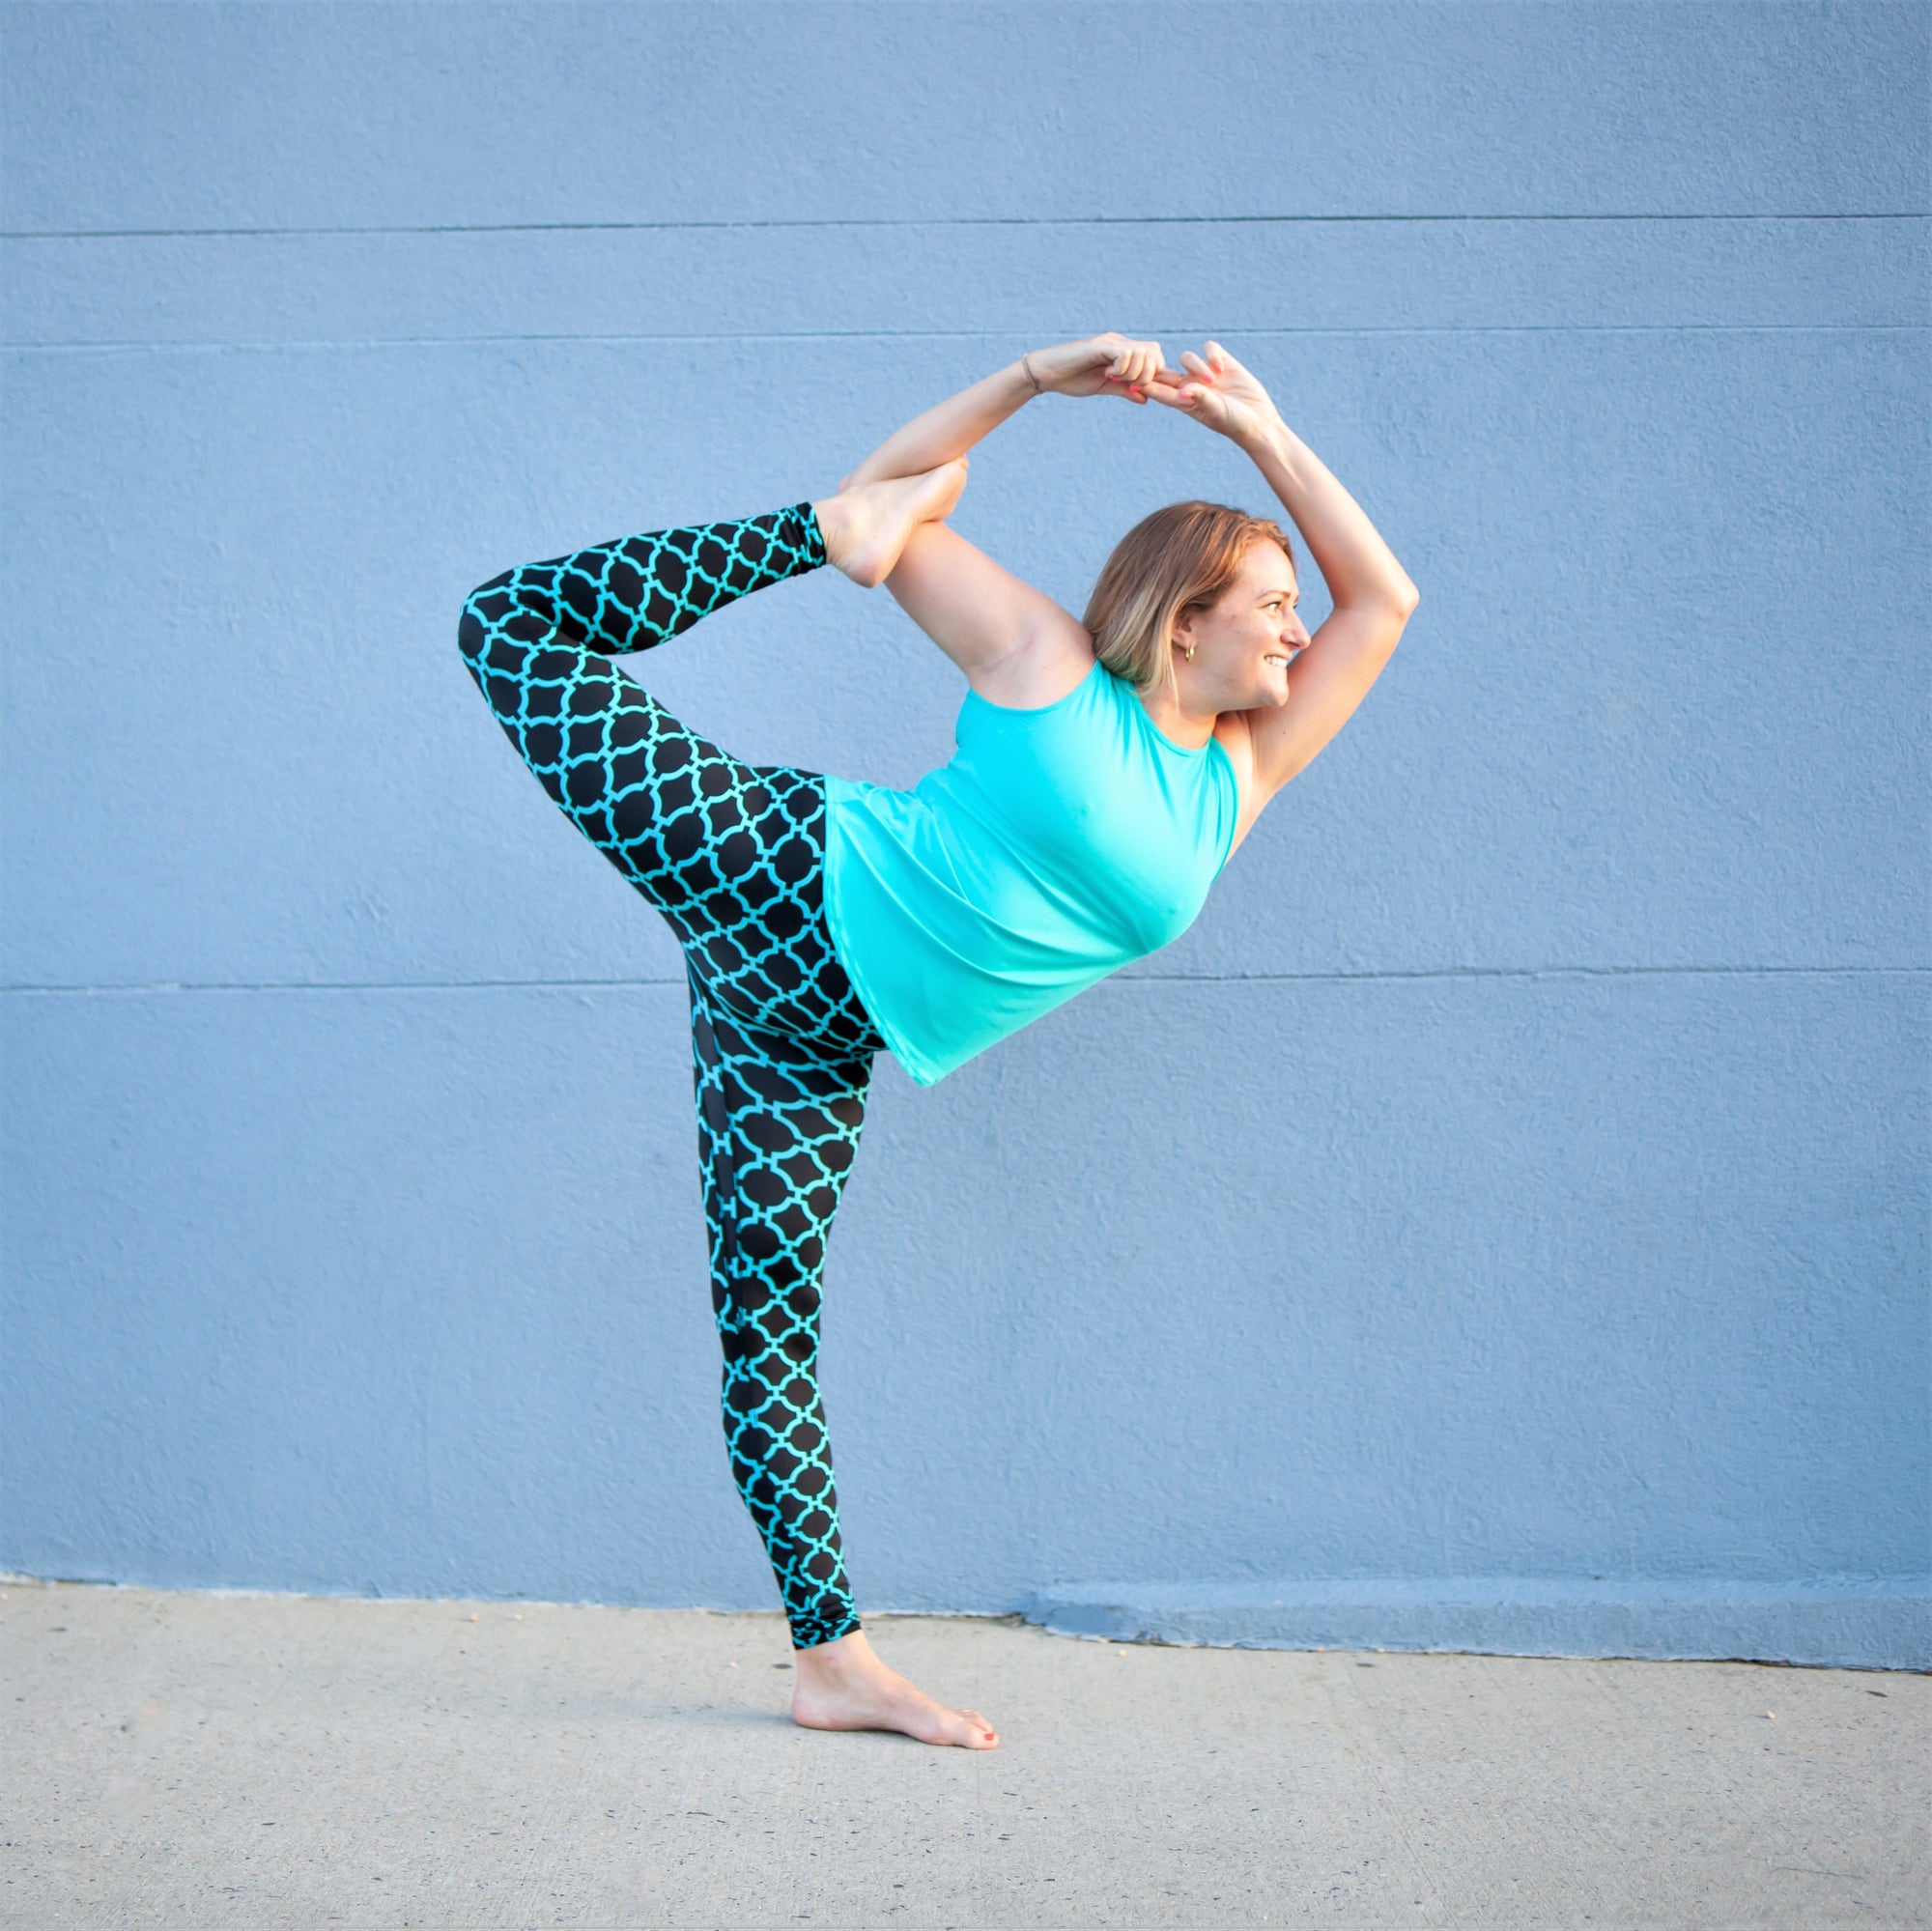 Celebrating International Day of Yoga - A Message From Our Founder, Kristine Deer